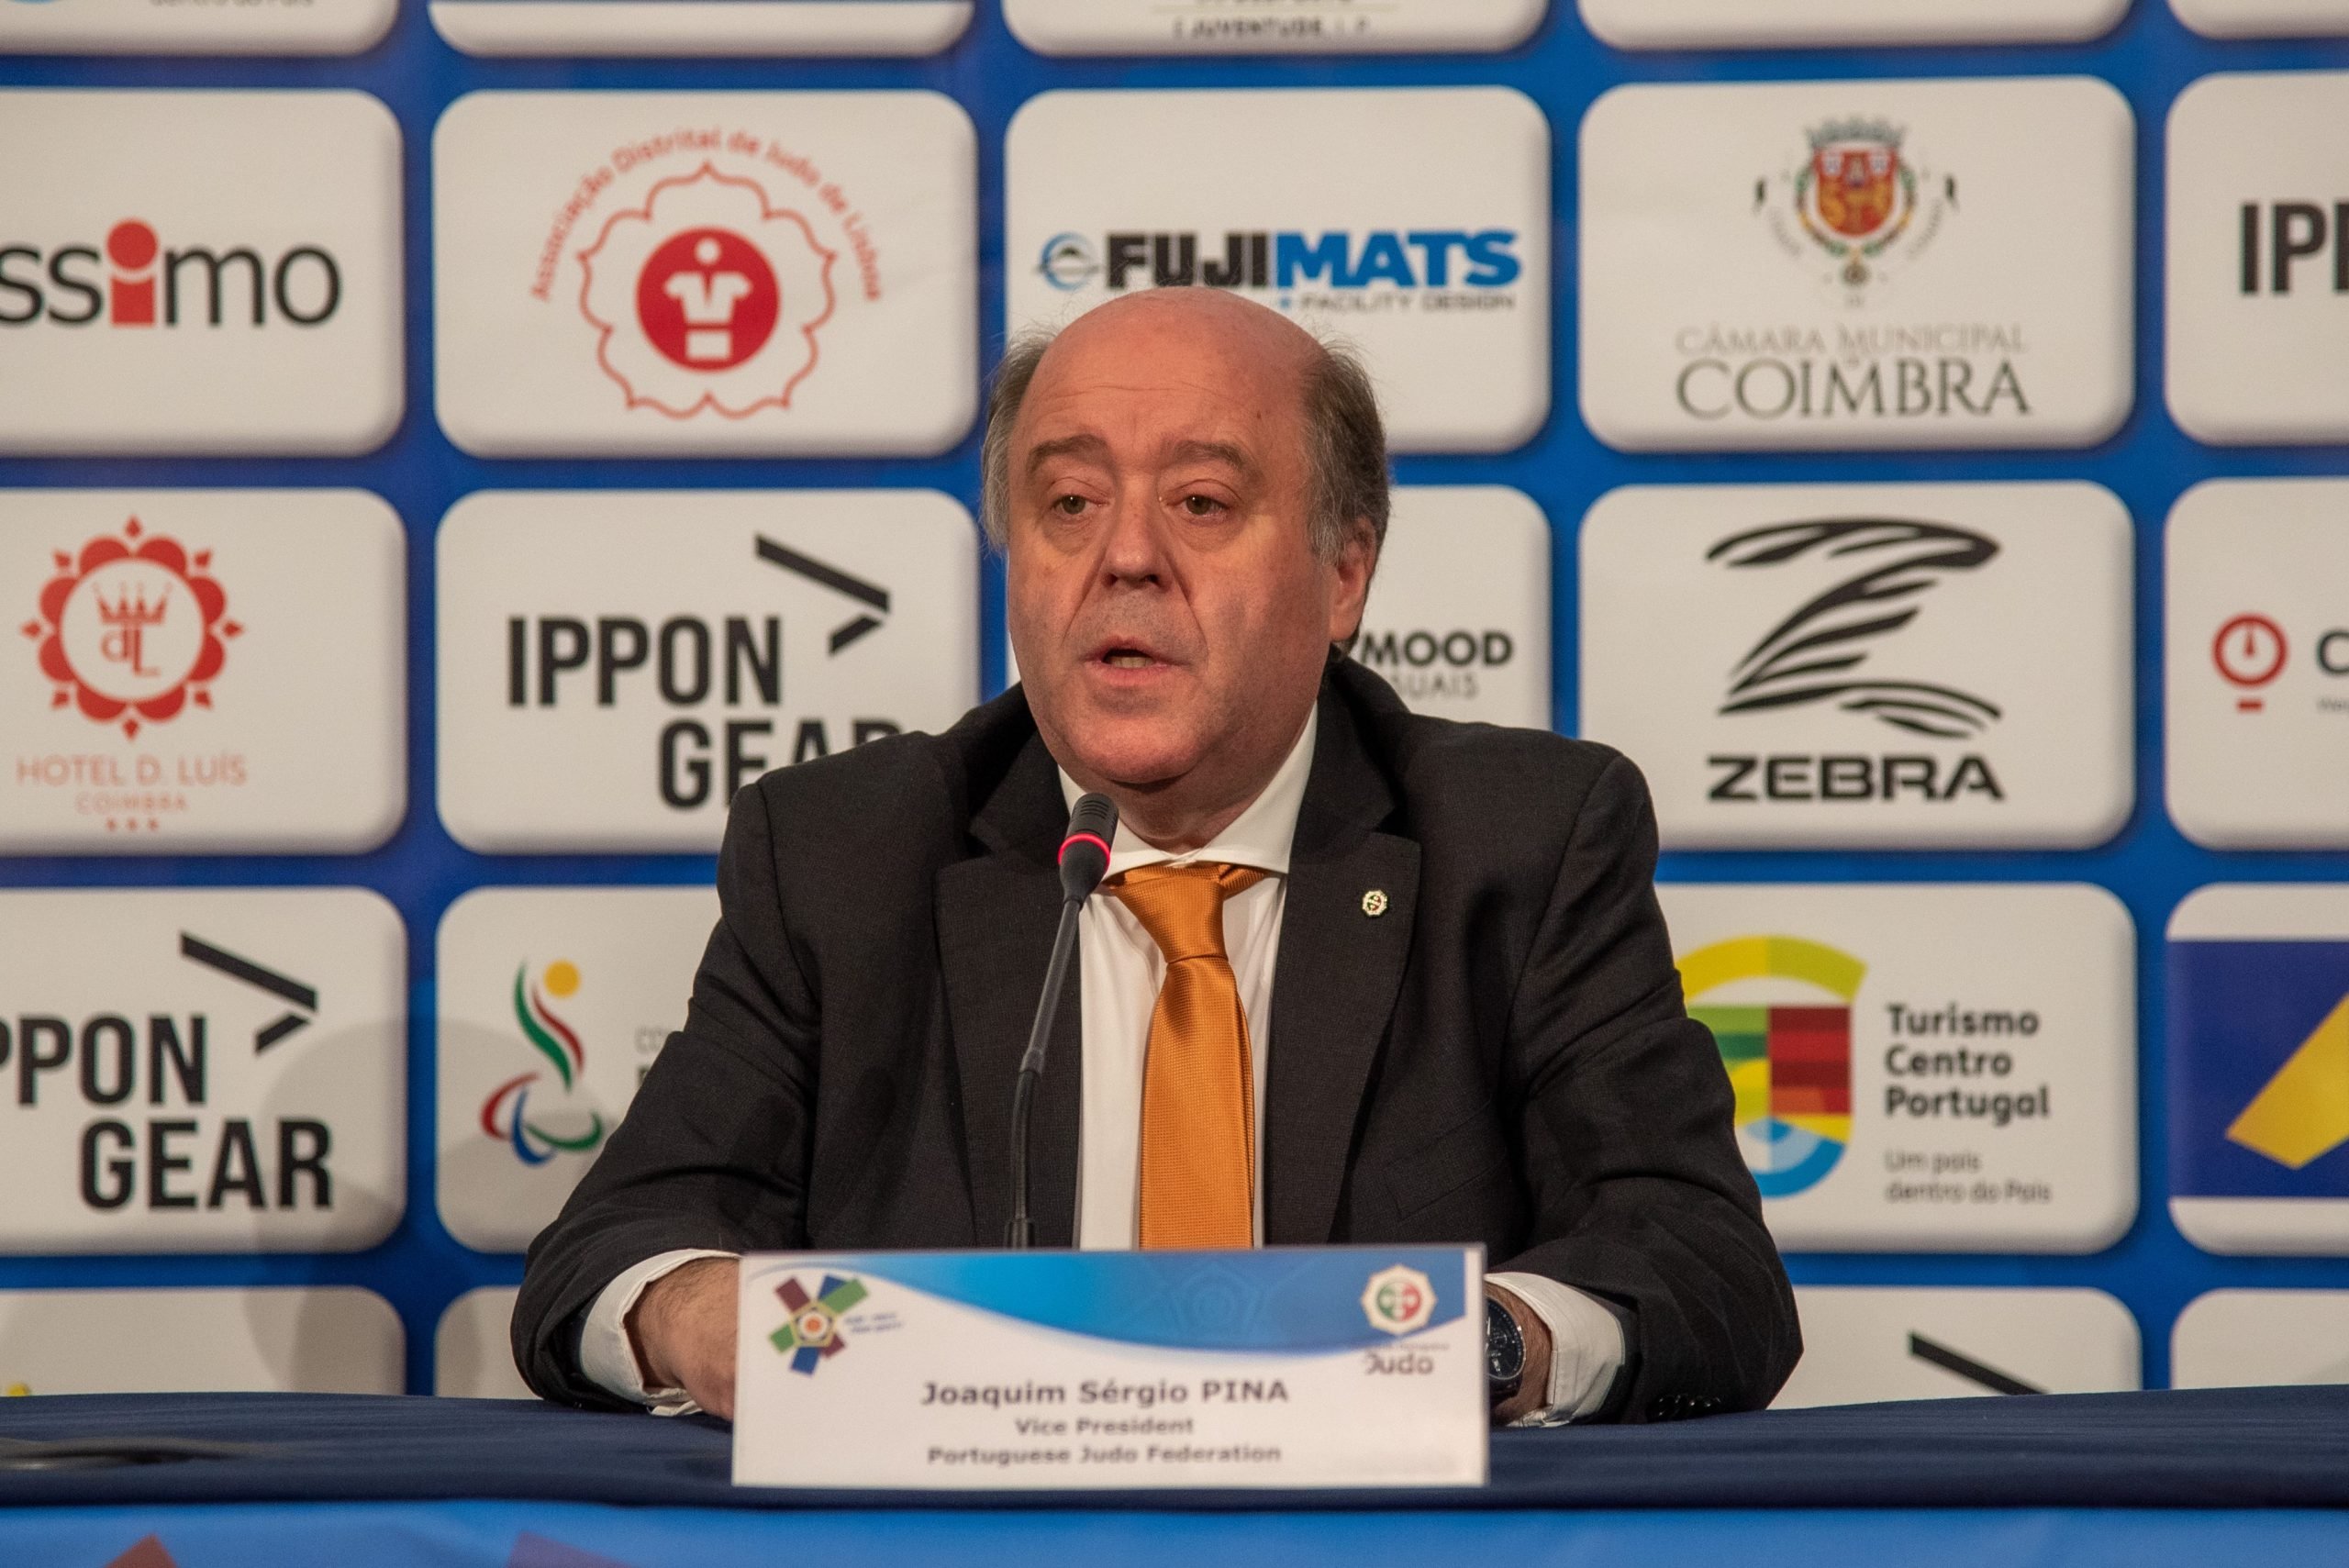 PORTUGUESE JUDO FEDERATION ELECTS NEW PRESIDENT